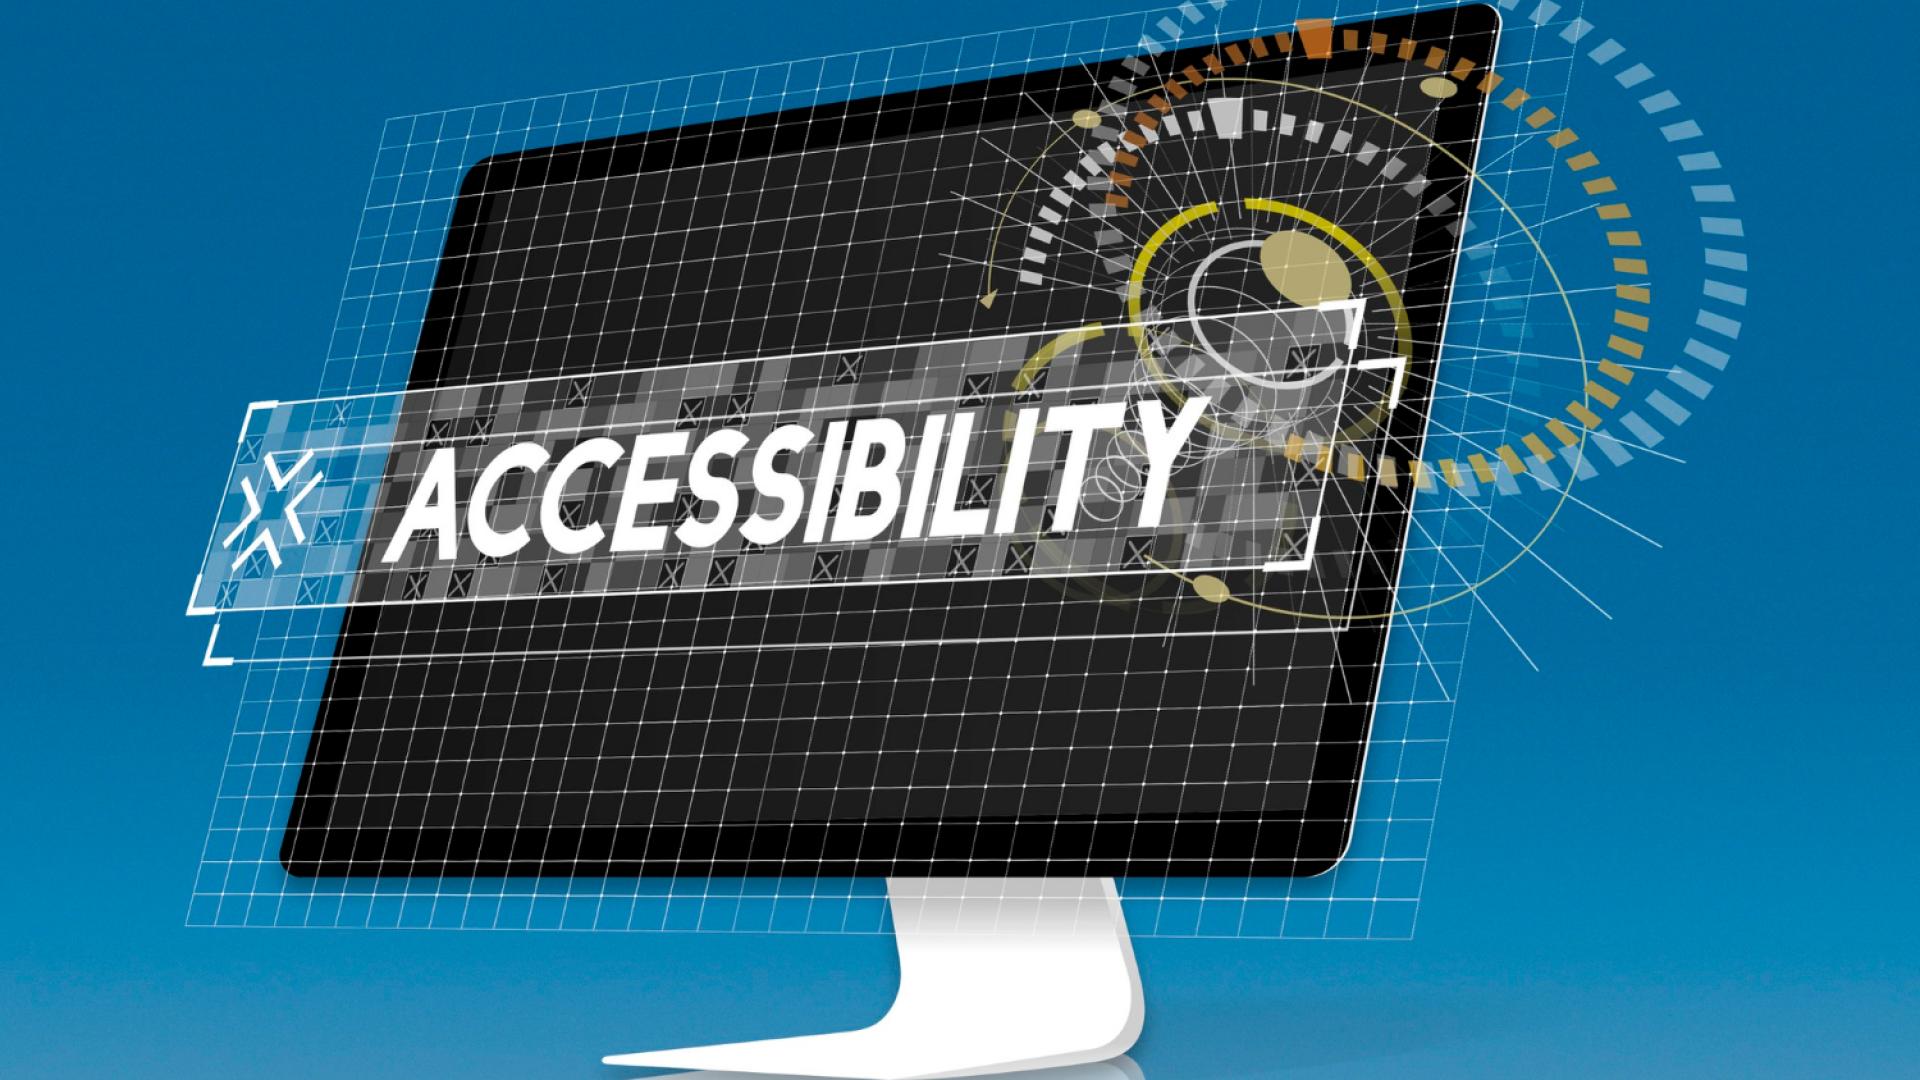  computer screen with accessbility word graphic popup